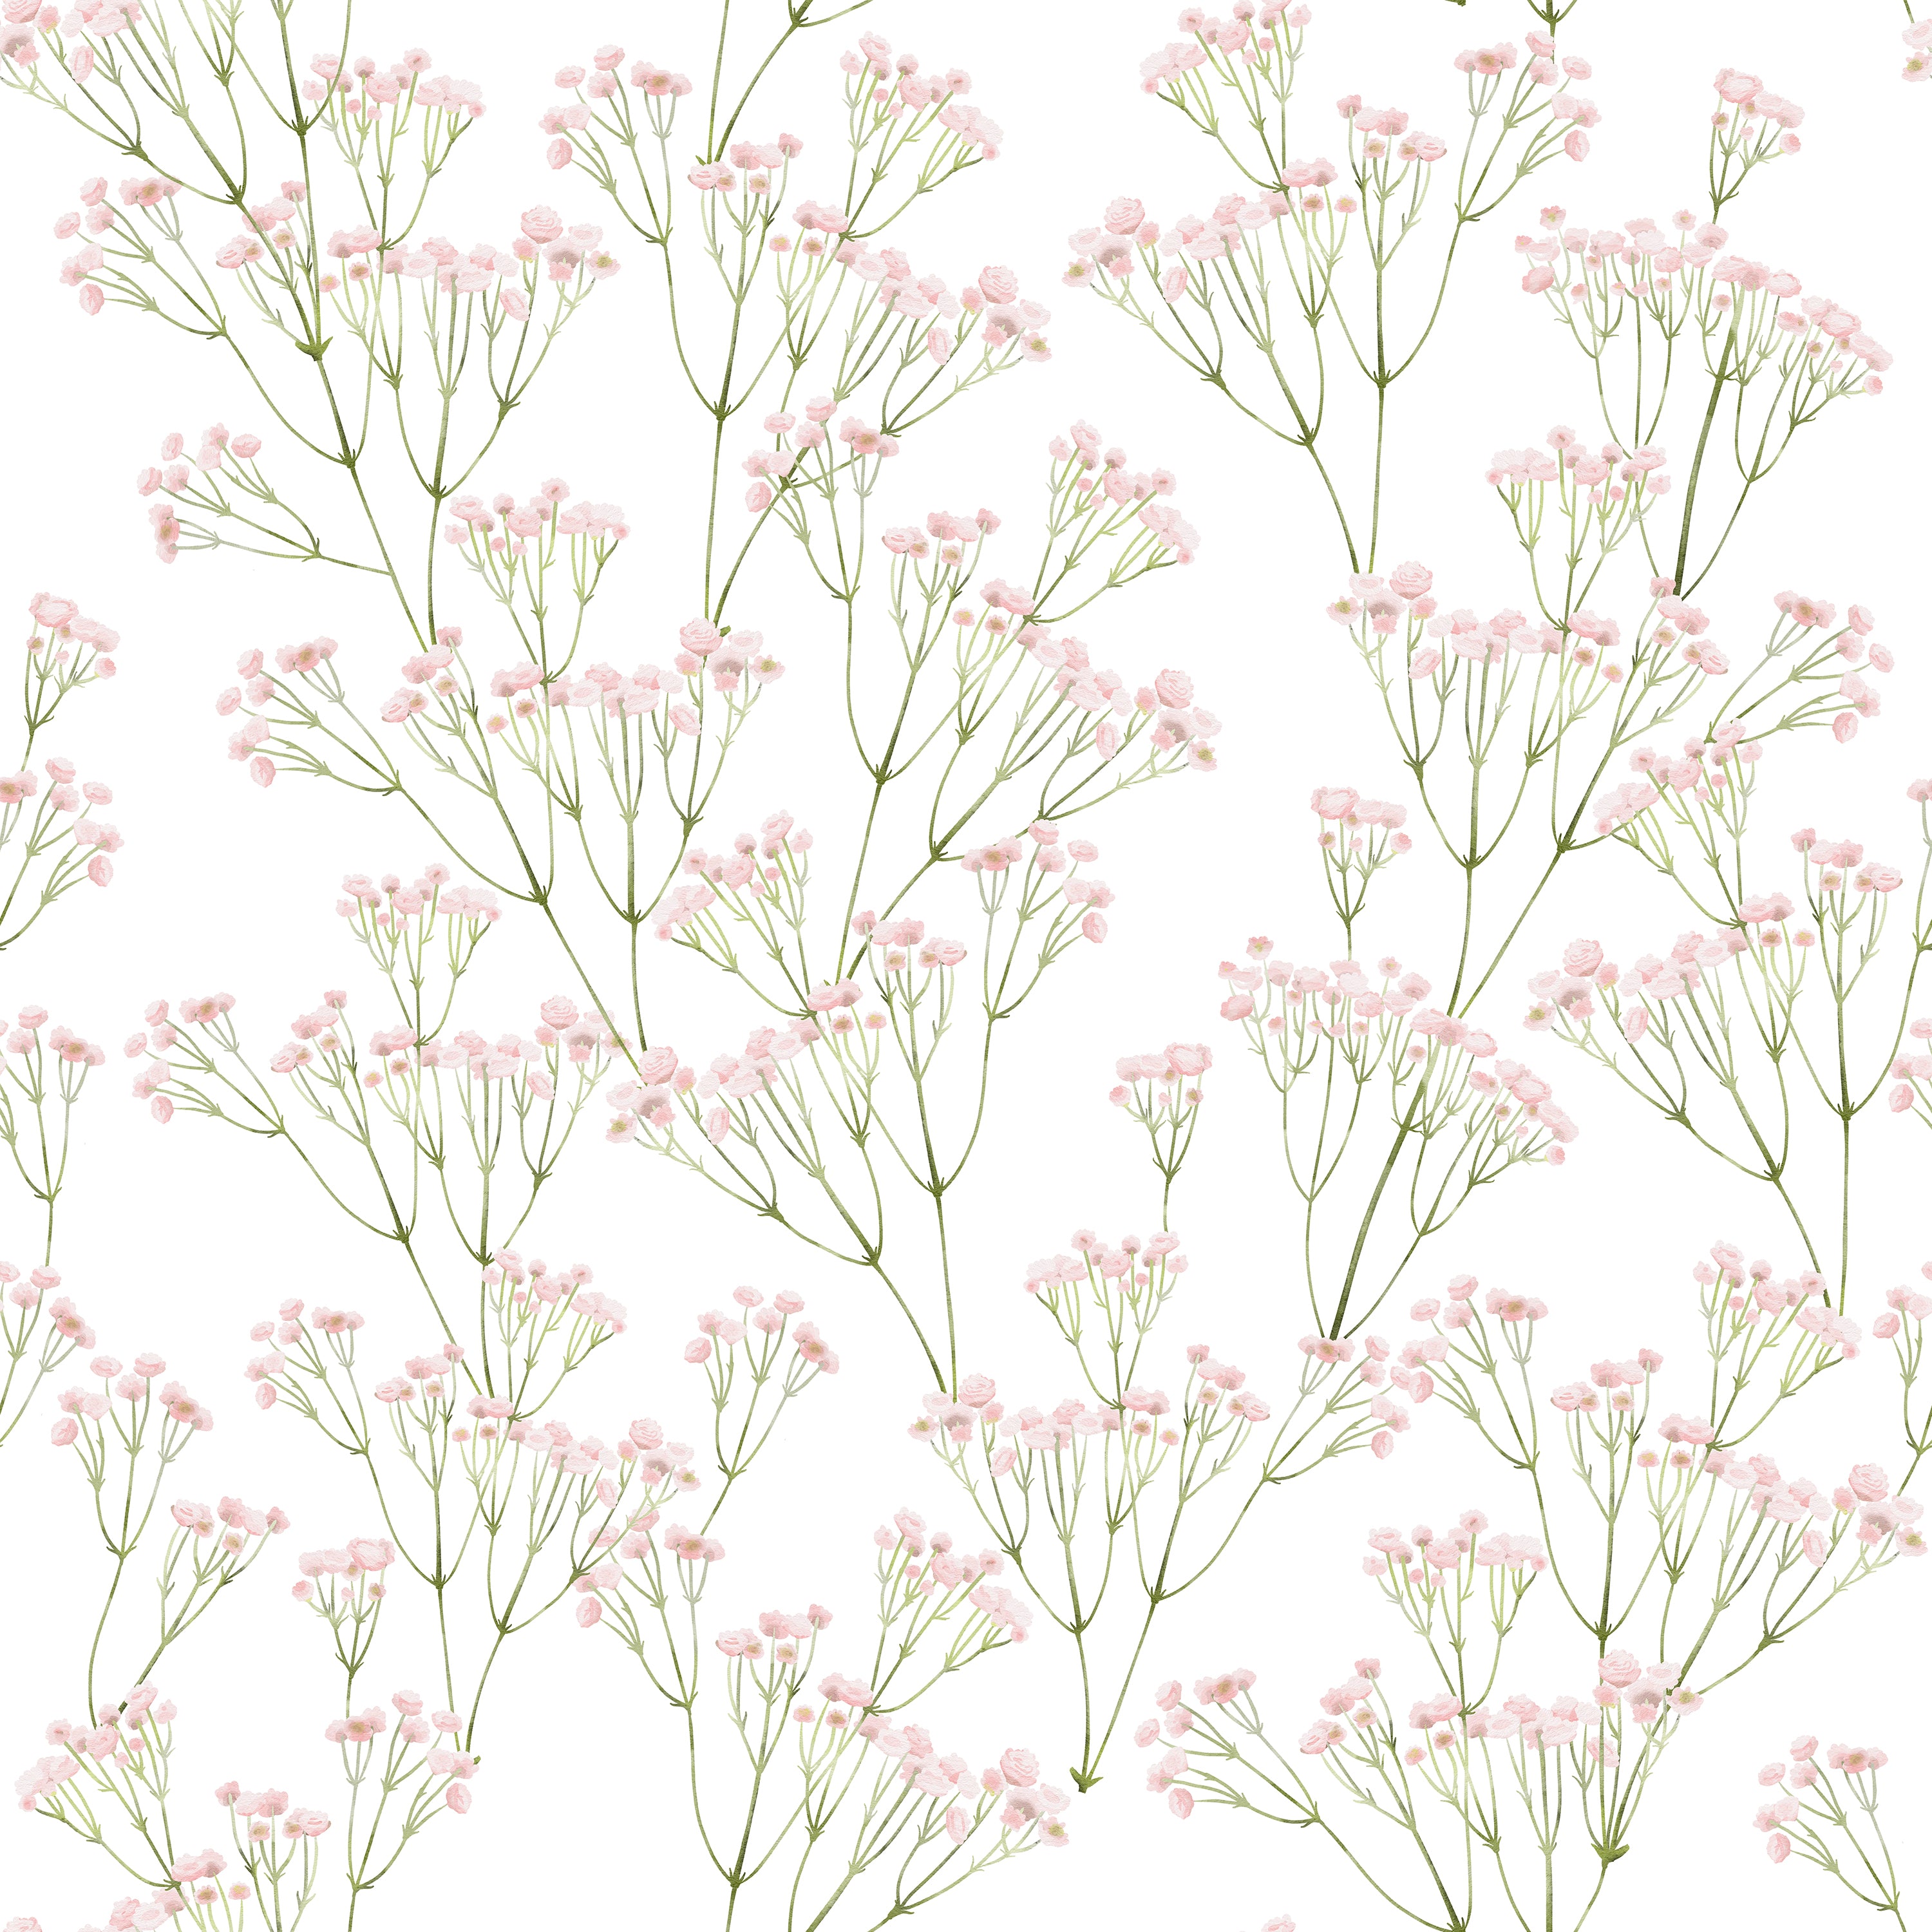 A close-up view of the 'Le Marchand de Fleurs Wallpaper', displaying a pattern of slender green stems leading to clusters of small, pink flowers. The wallpaper's botanical print exudes a sense of springtime freshness and is ideal for adding a floral accent to any room.